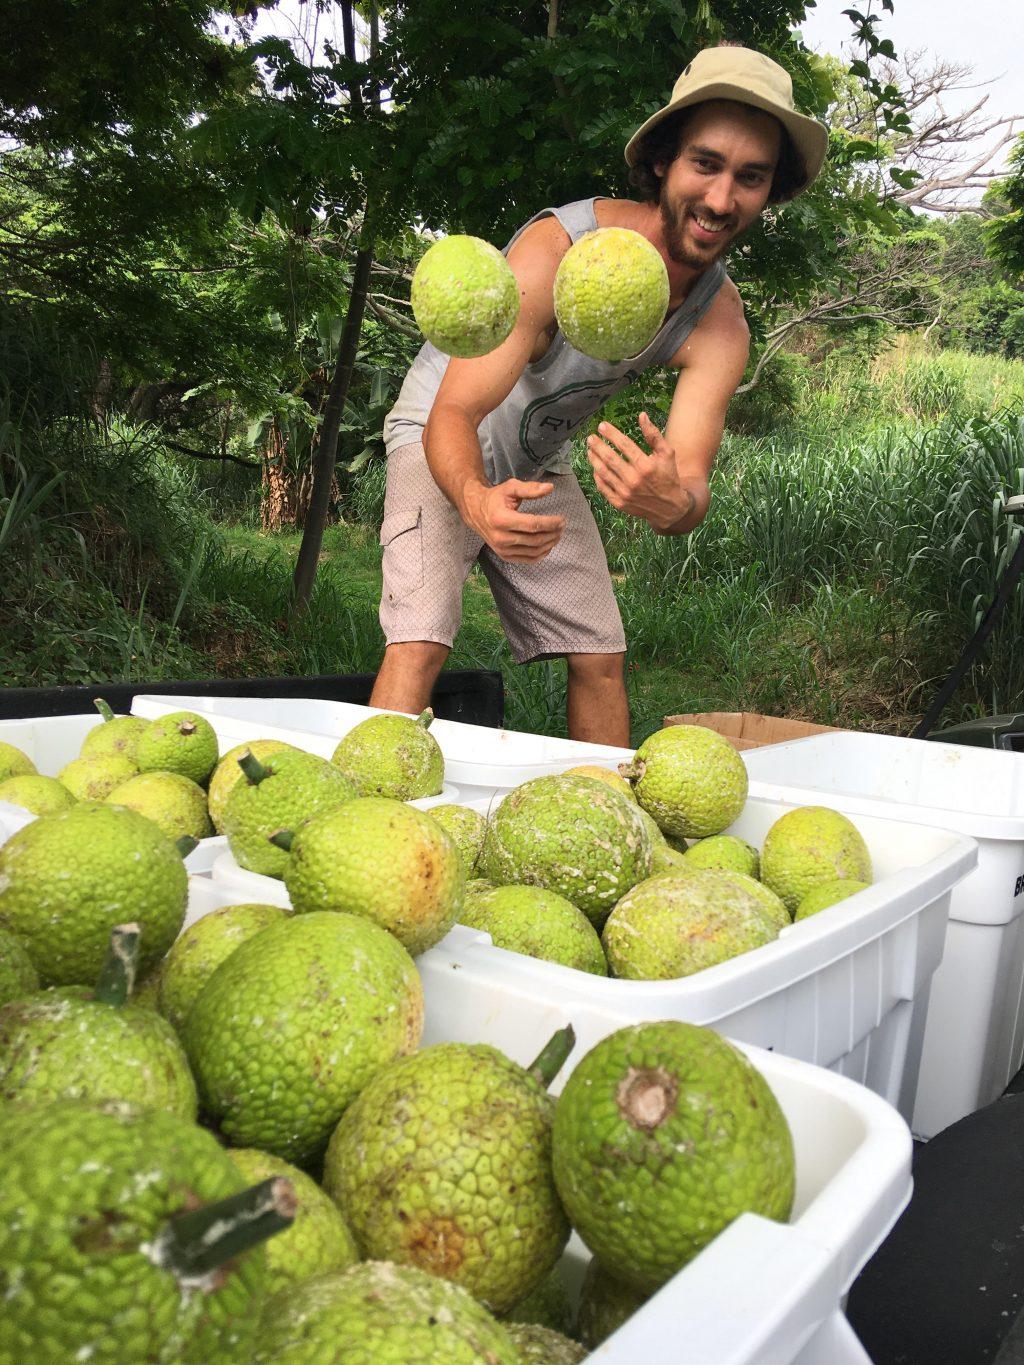 A worker at Hawaiʻi ʻUlu Producers Cooperative tosses ʻulu (Hawaiian for breadfruit) into a bin. The cooperative, one of the many organizations supported by Ulupono Initiative, works with the Hawaiʻi Food Basket to provide those in need on Hawaiʻi Island with steamed and frozen ‘ulu, ‘uala (Hawaiian for sweet potato) and squash during the COVID-19 pandemic. Photo courtesy of the Hawai‘i ‘Ulu Producers Cooperative.